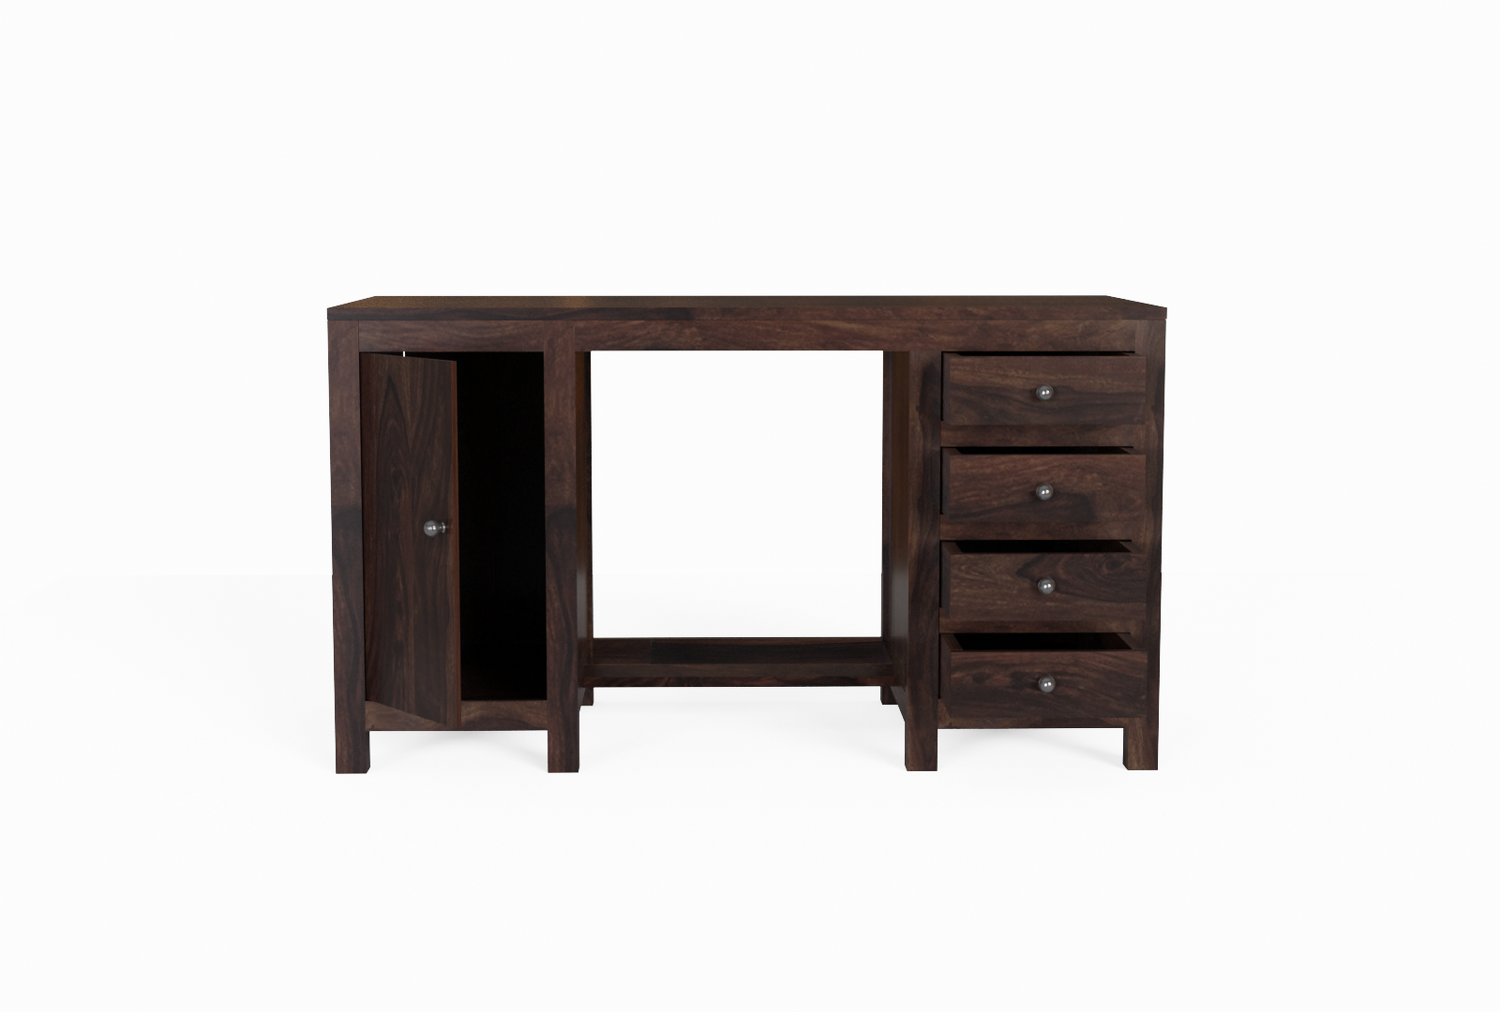 Woodwing Solid Sheesham Wood Study Table With 4 Drawers (Walnut Finish)